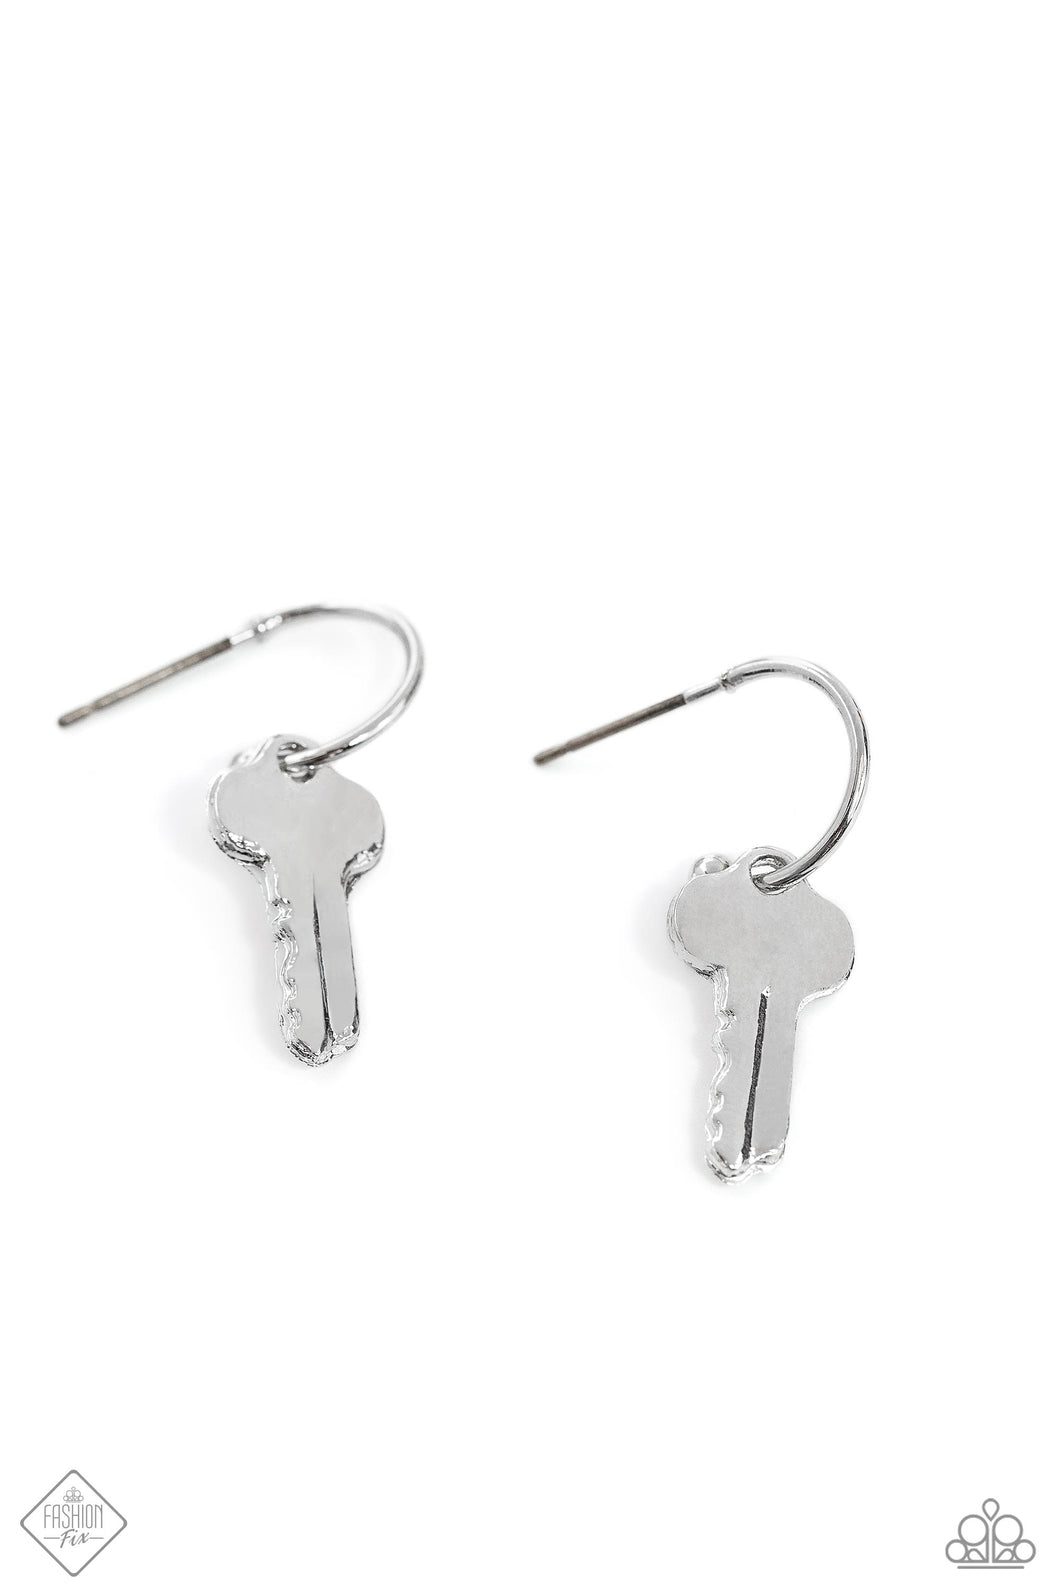 The Key to Everything - Silver (Key) Earring (MM-0124)